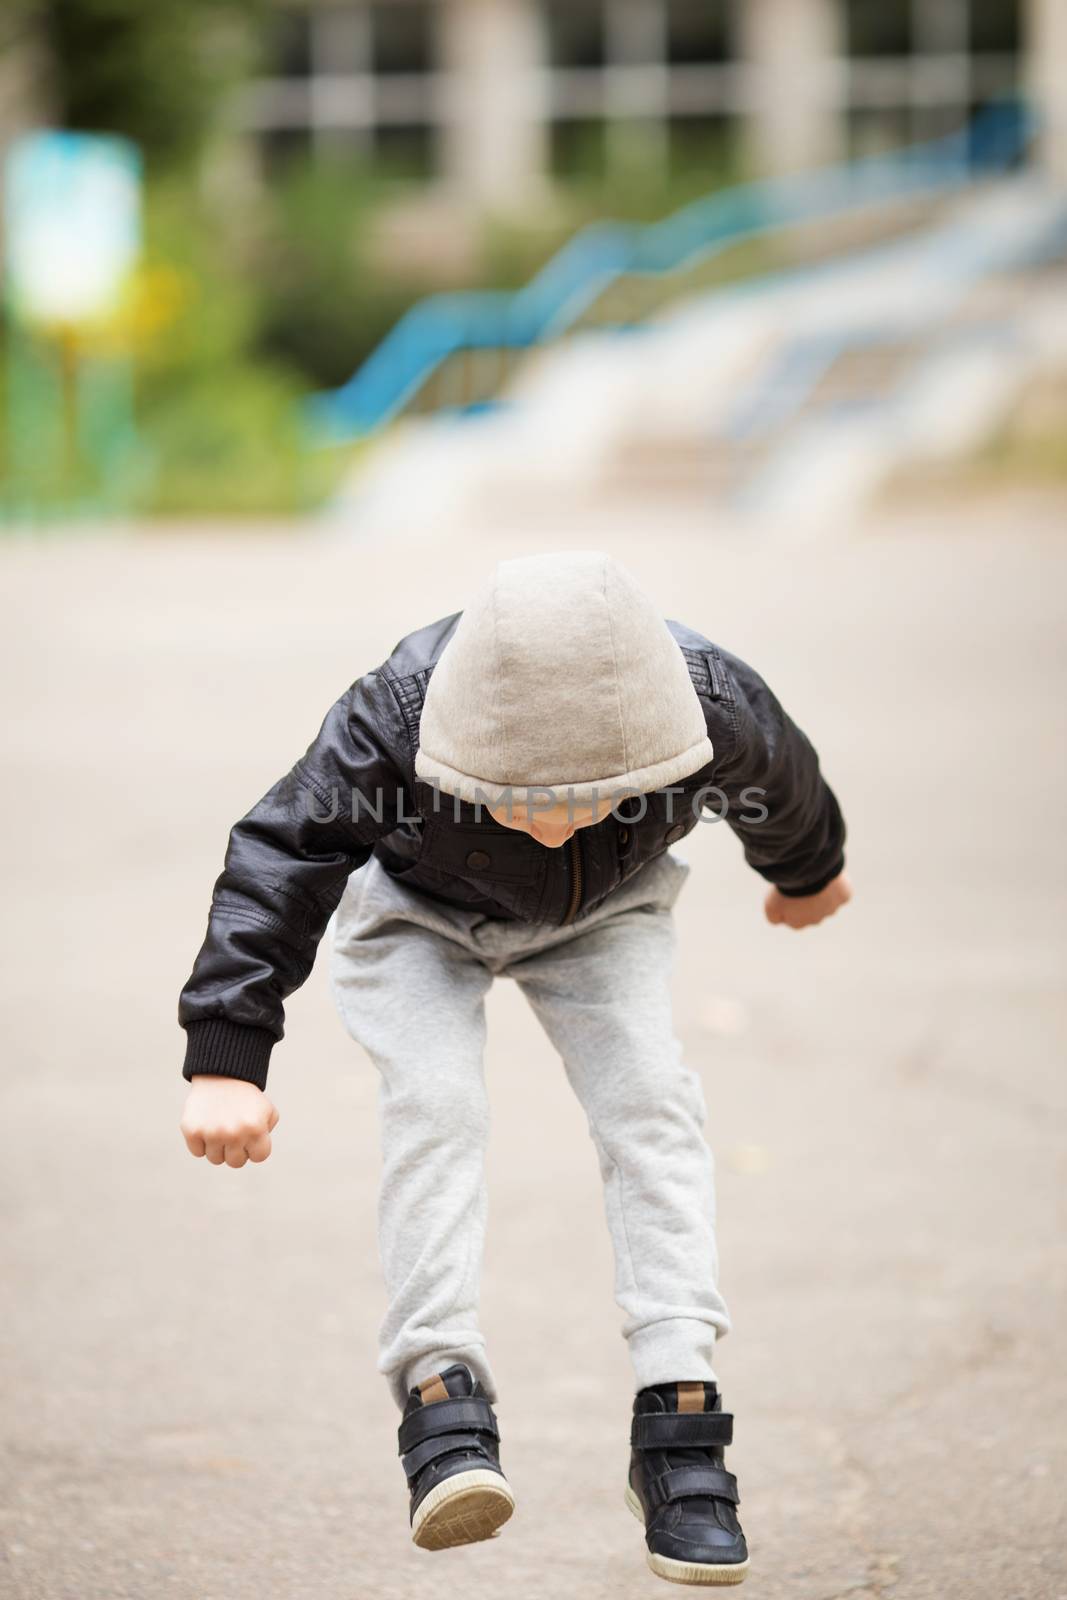 Full-length portrait of adorable little urban boy wearing black leather jacket. City style. Urban kids. Kid jumping and having fun outdoors